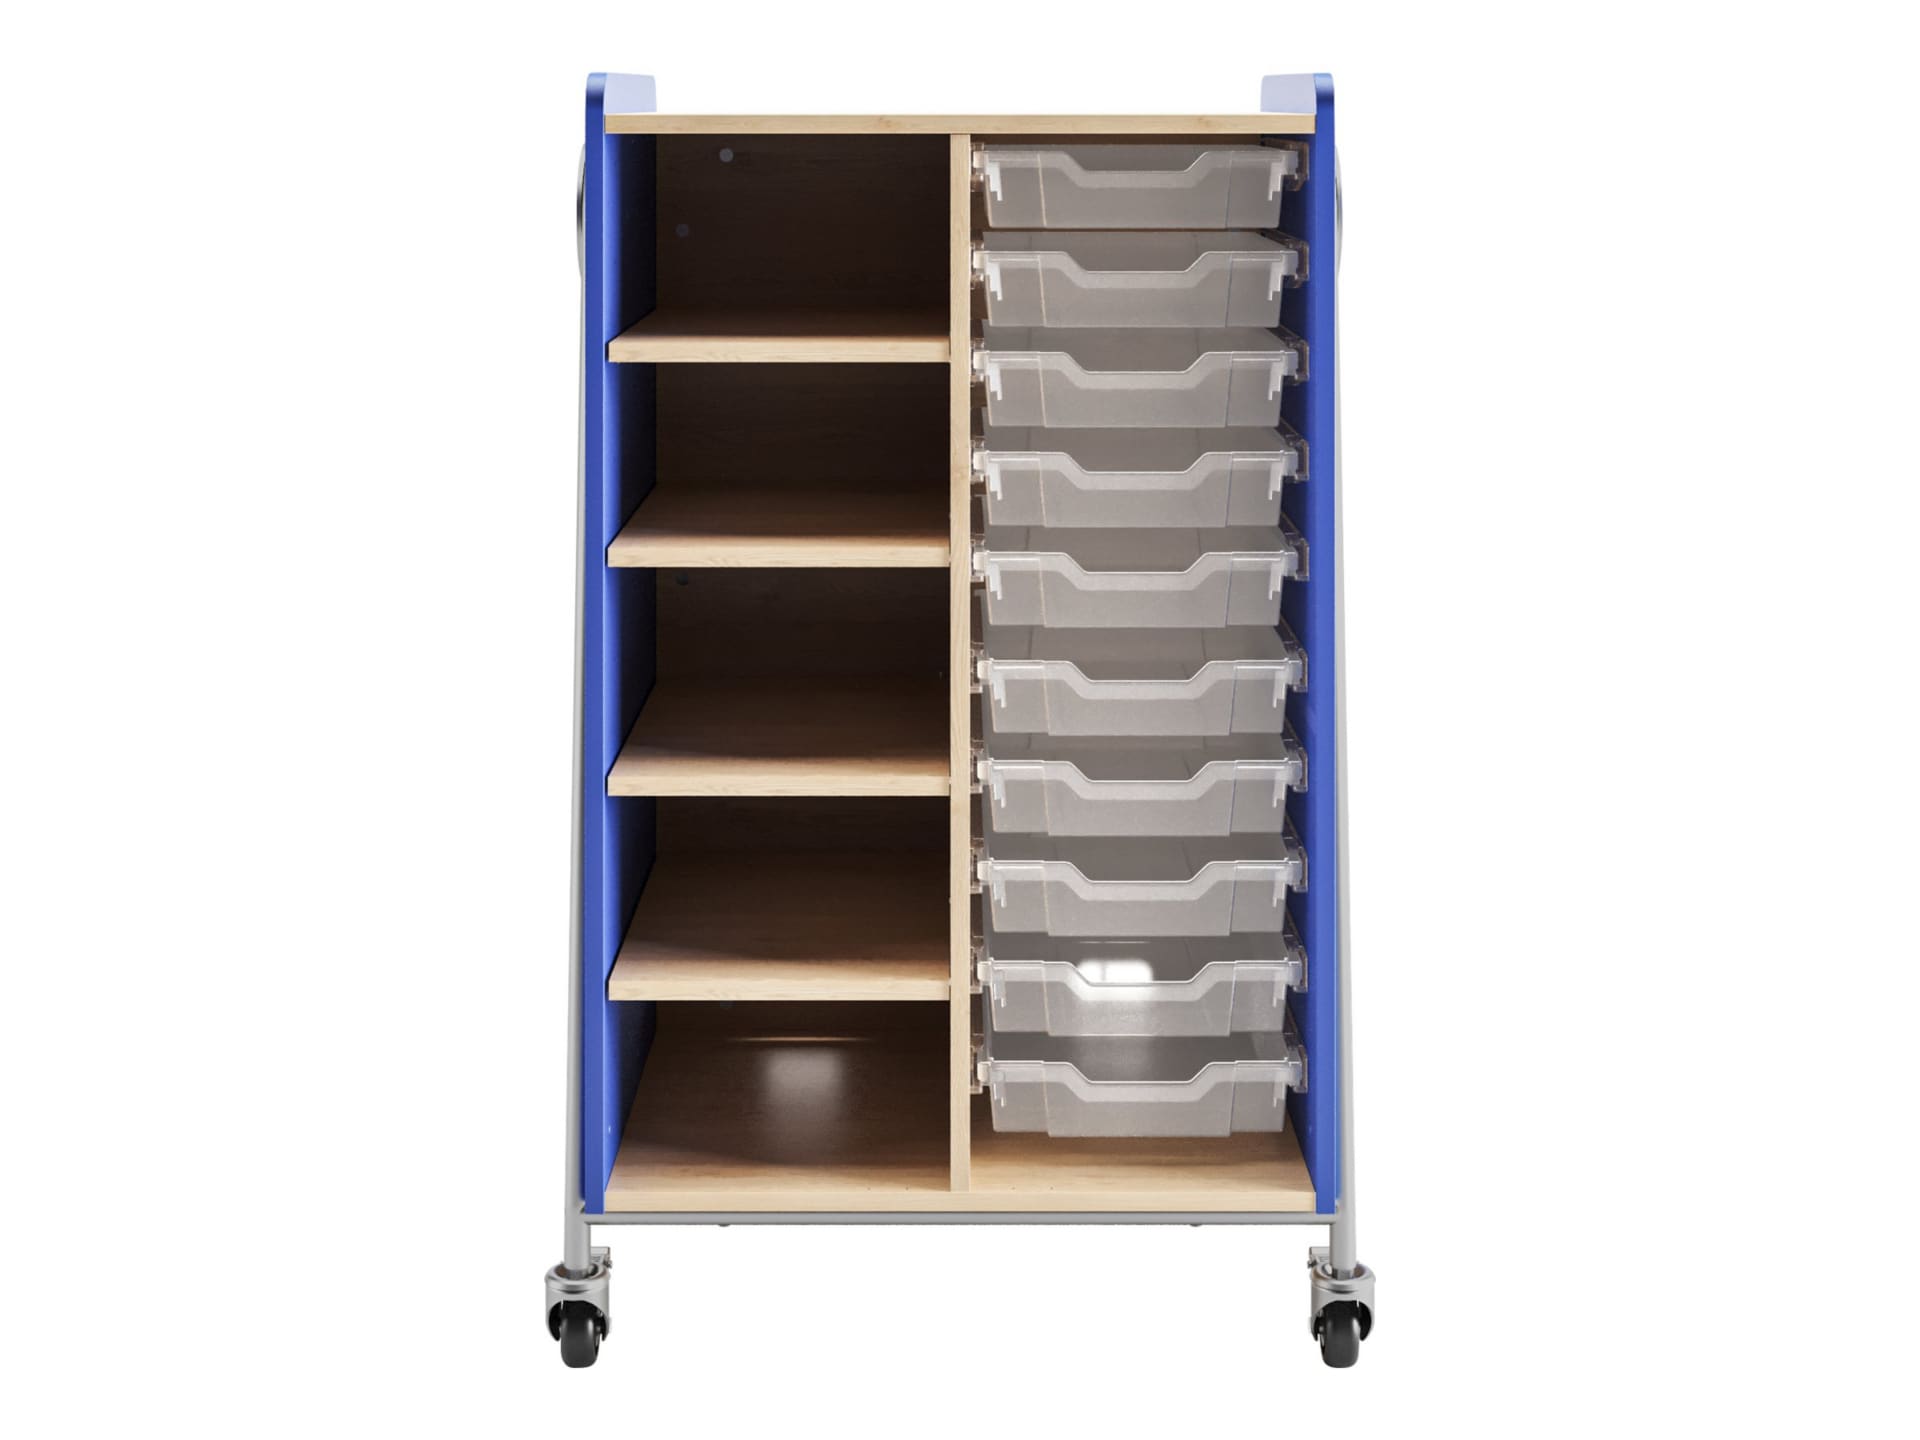 Safco Whiffle Typical 2 - storage trolley - 10 drawers - 4 shelves - spectr